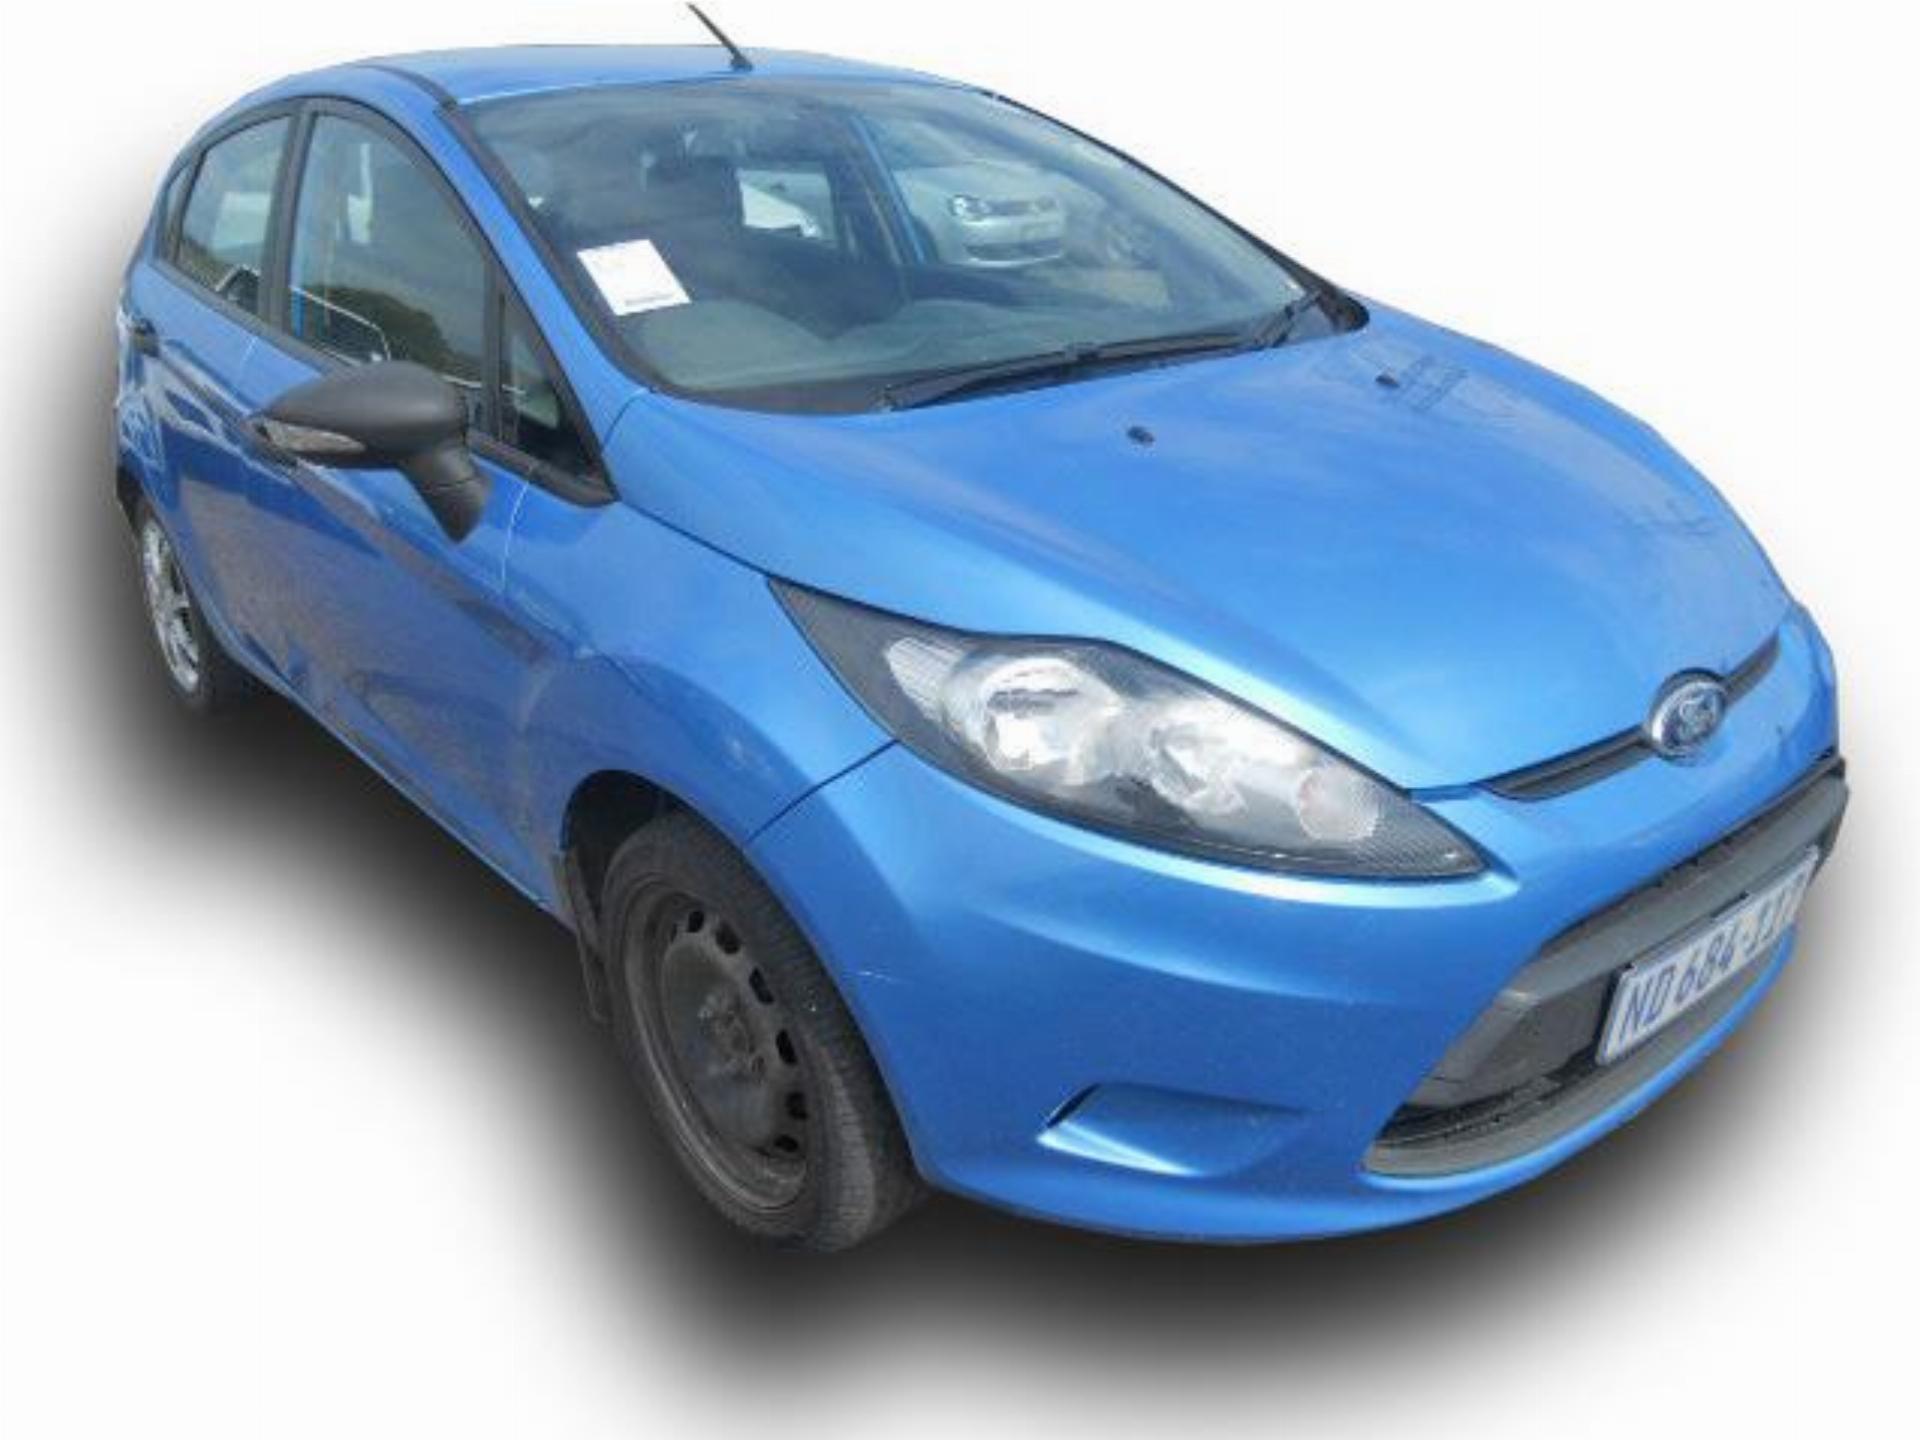 Ford Fiesta 1.4 I Ambiente 5DR